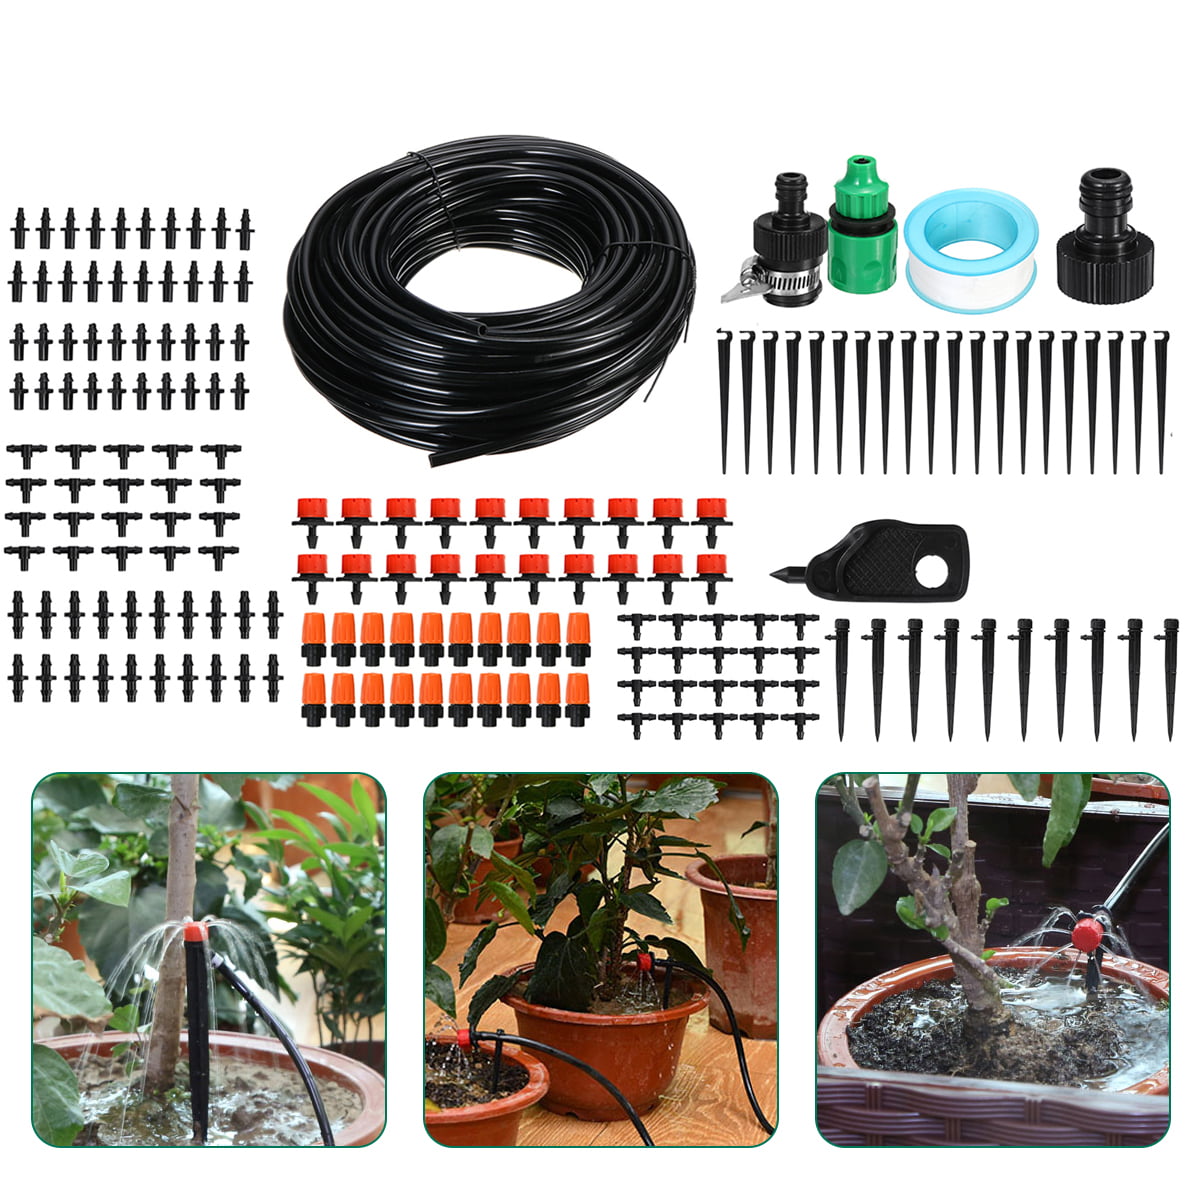 Automatic Drip Irrigation System Kit Plant Adjustable Self Watering Garden Hose 